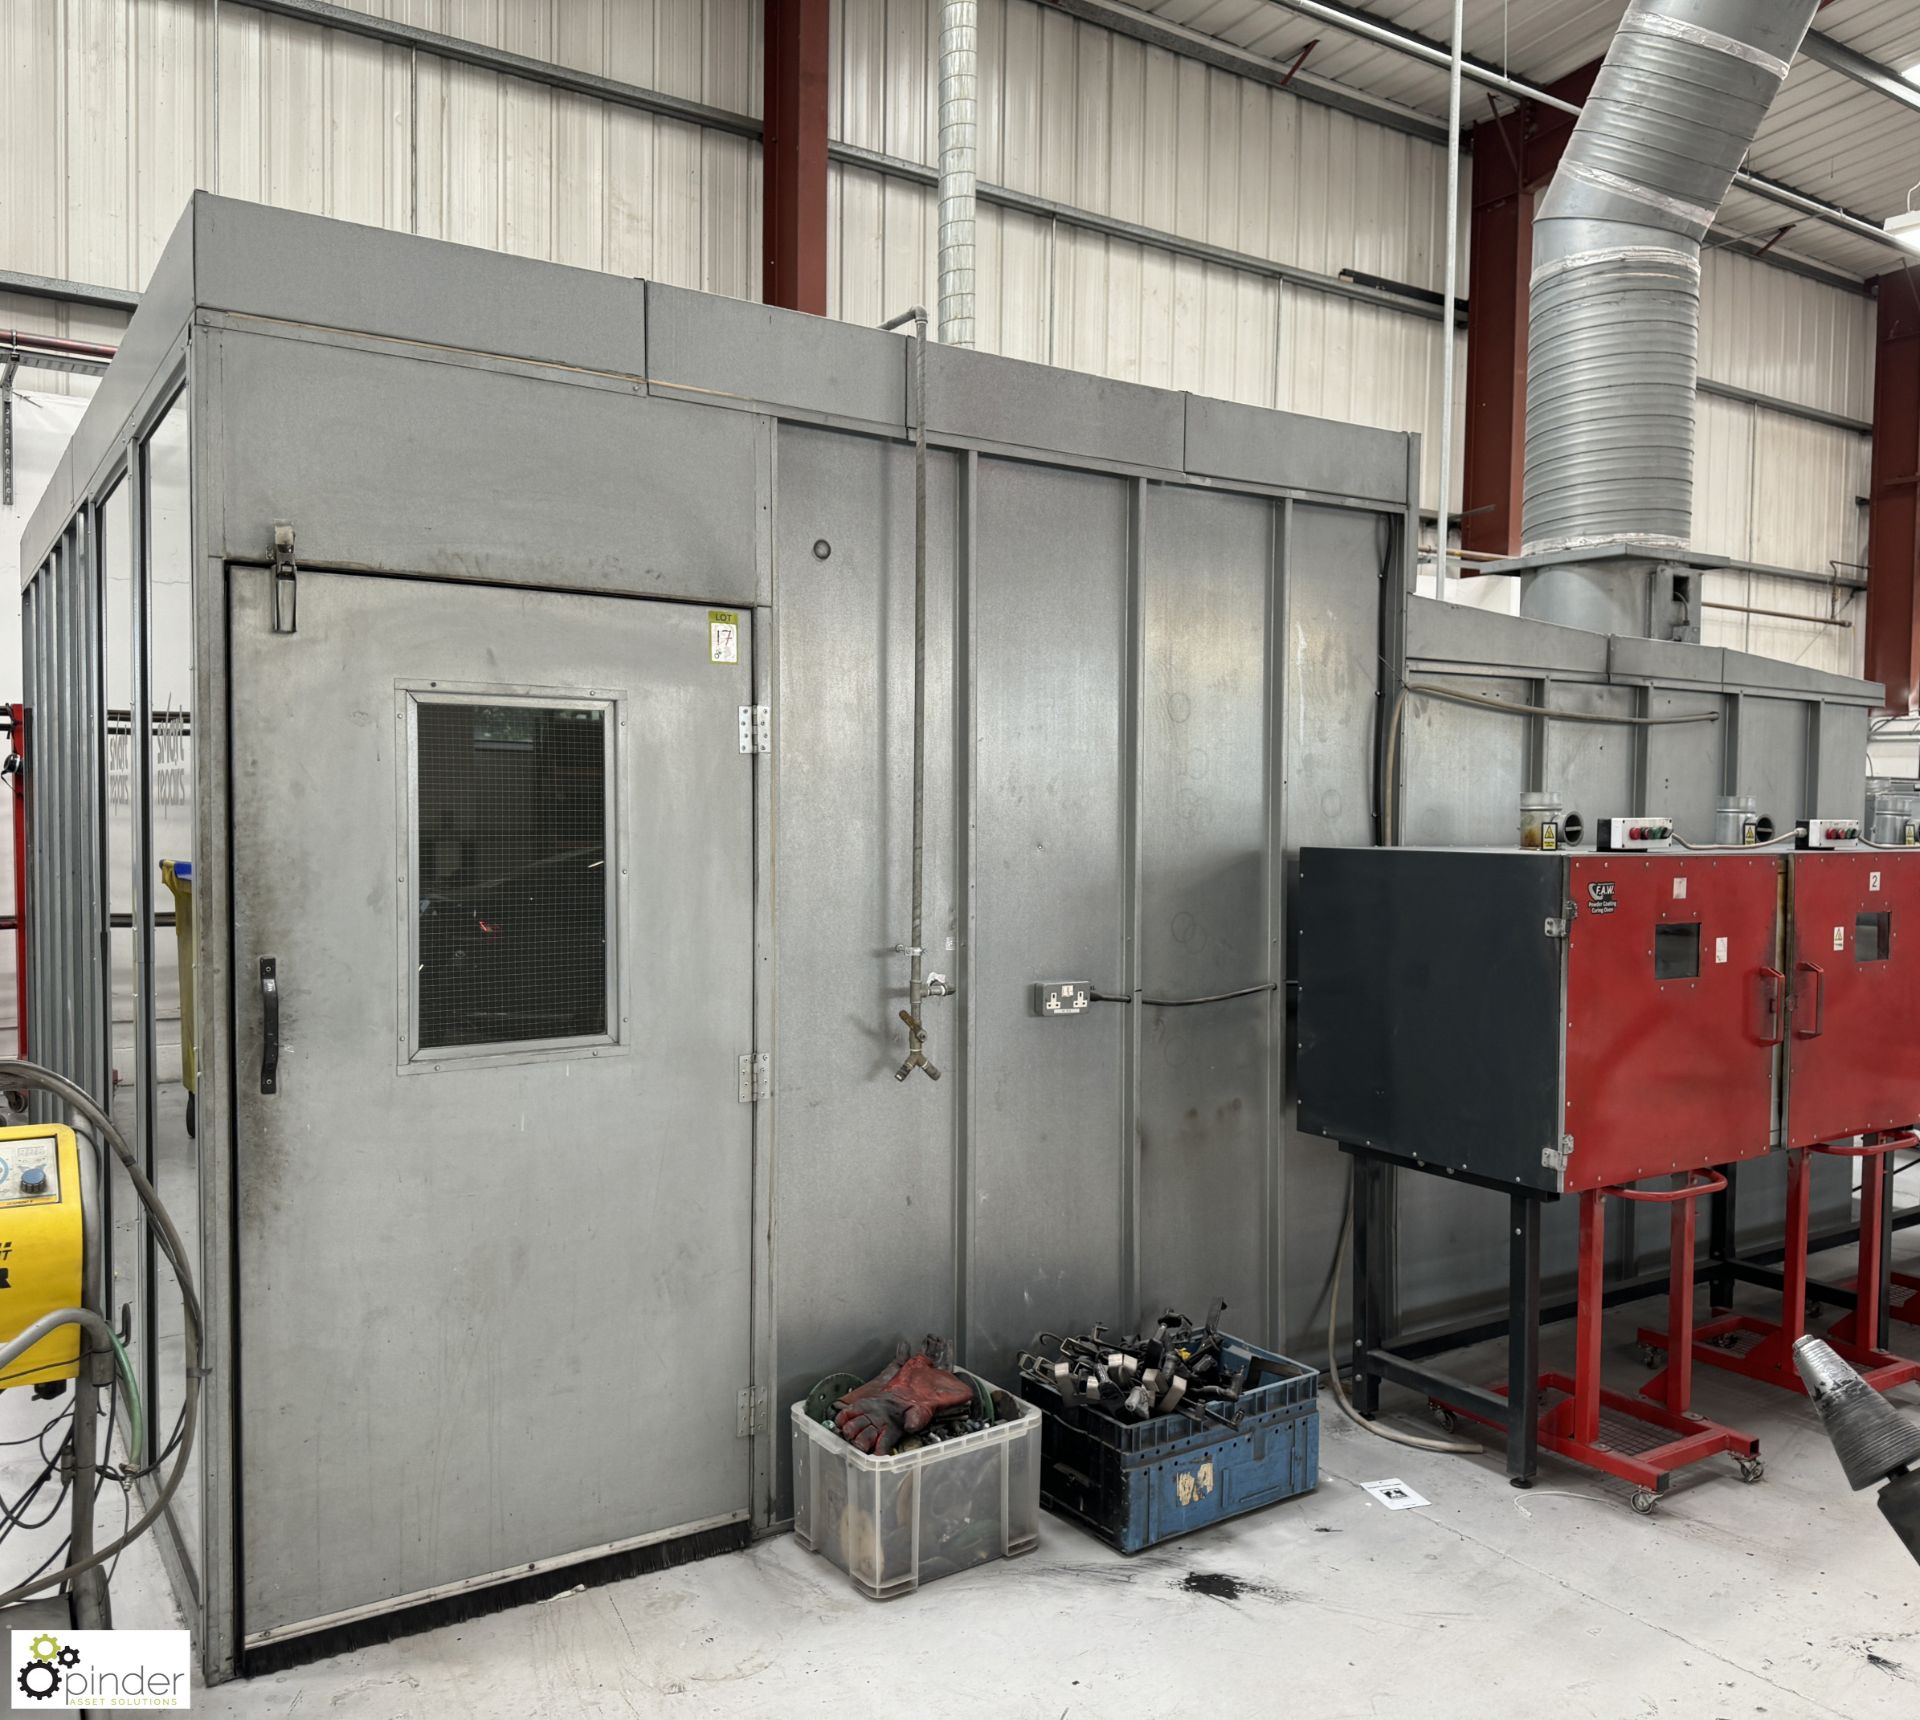 Greenair galvanised combined Wheel Spray Booth and gas fired Curing Oven, spray booth 1800mm x 900mm - Image 4 of 18